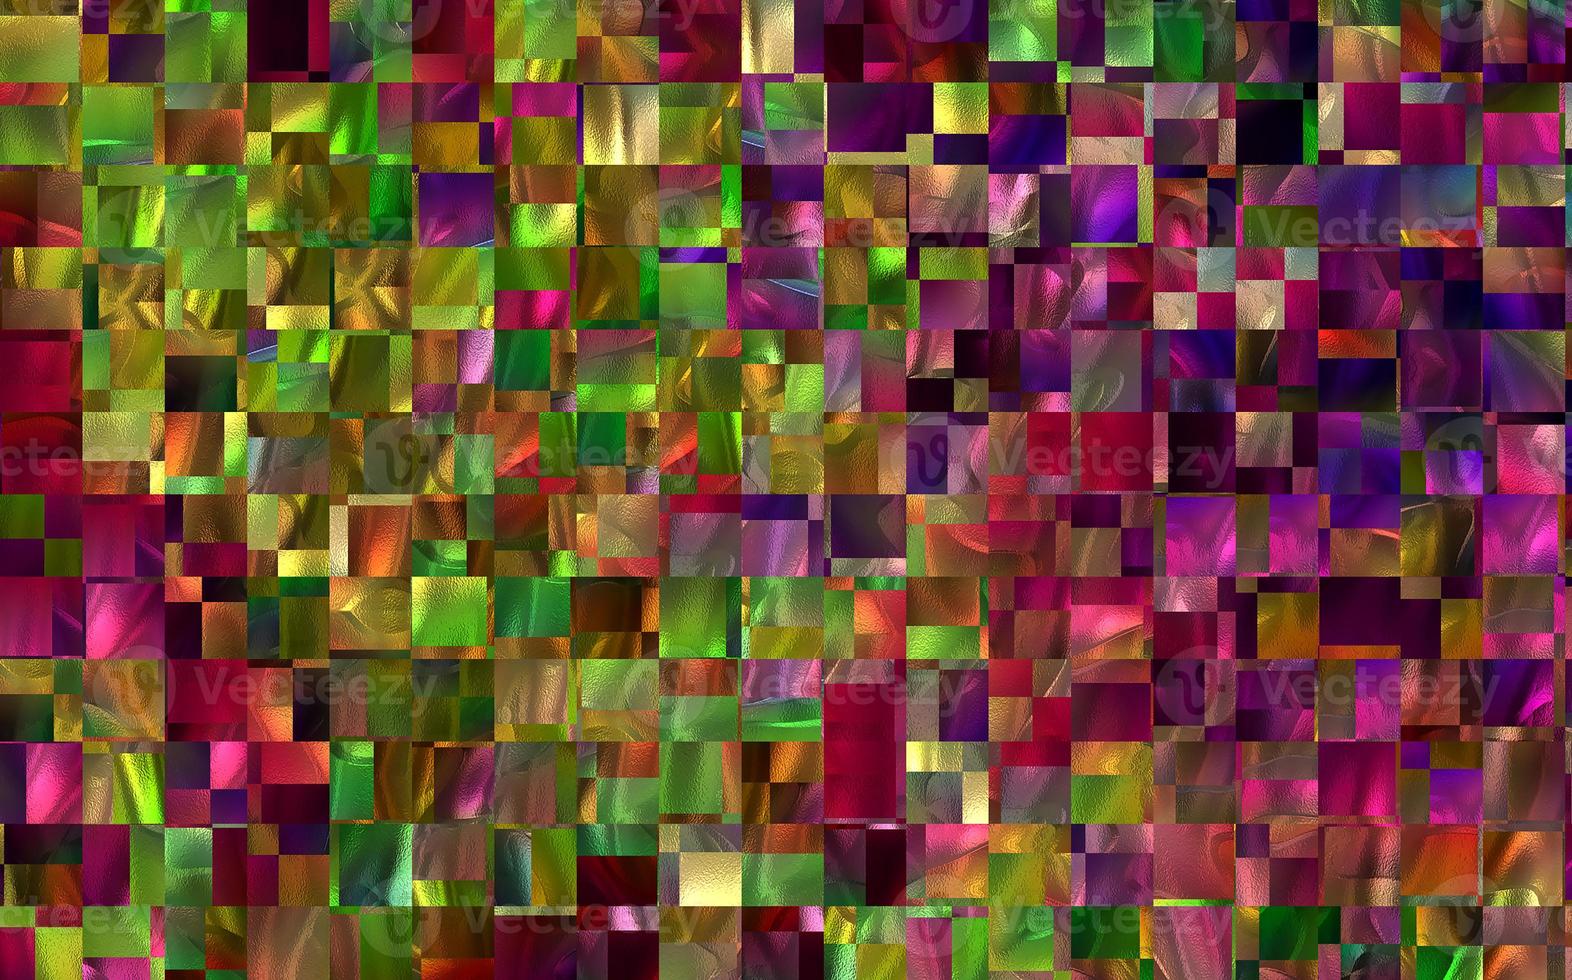 Abtract geometric shapes background,Geometric holographic texture,Abstract squares and rectengular background photo